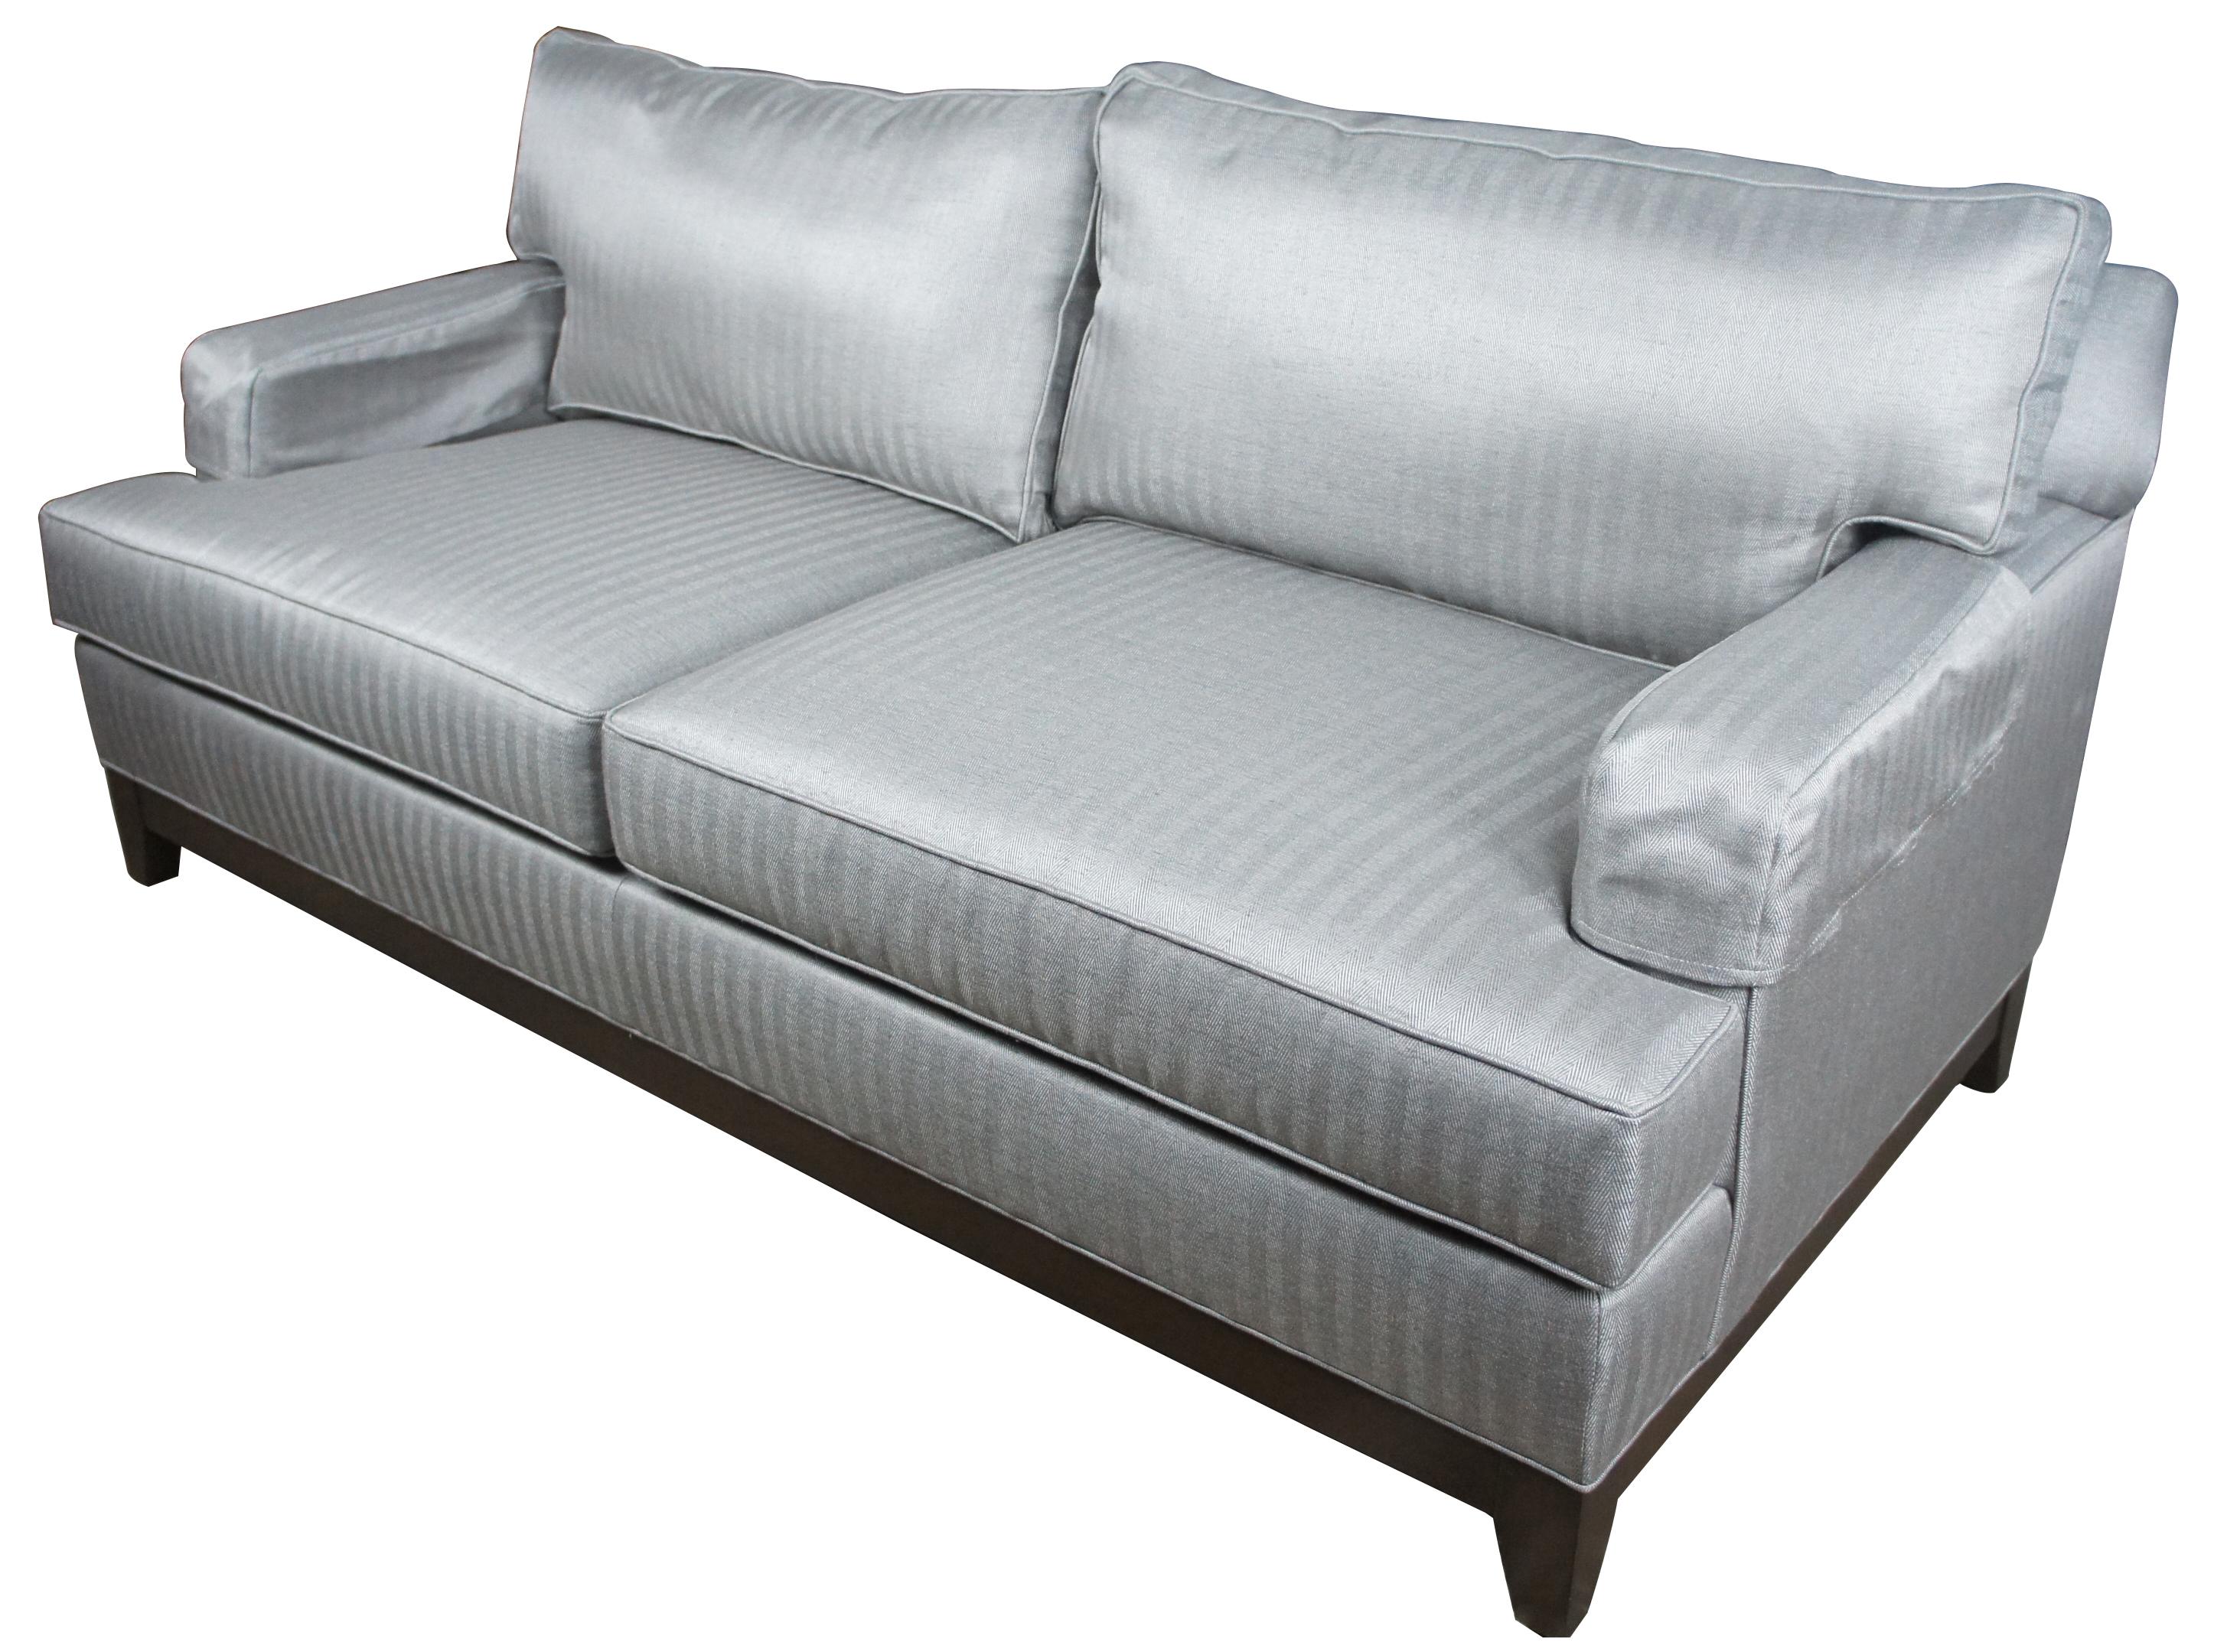 Ethan Allen Arcata two-seat sofa Gray Herringbone Contemporary 20-2114

Comfort abounds in this perfectly scaled, contemporary seating collection. A signature wood base with tapered legs anchors loose back and seat cushions and track arms, making